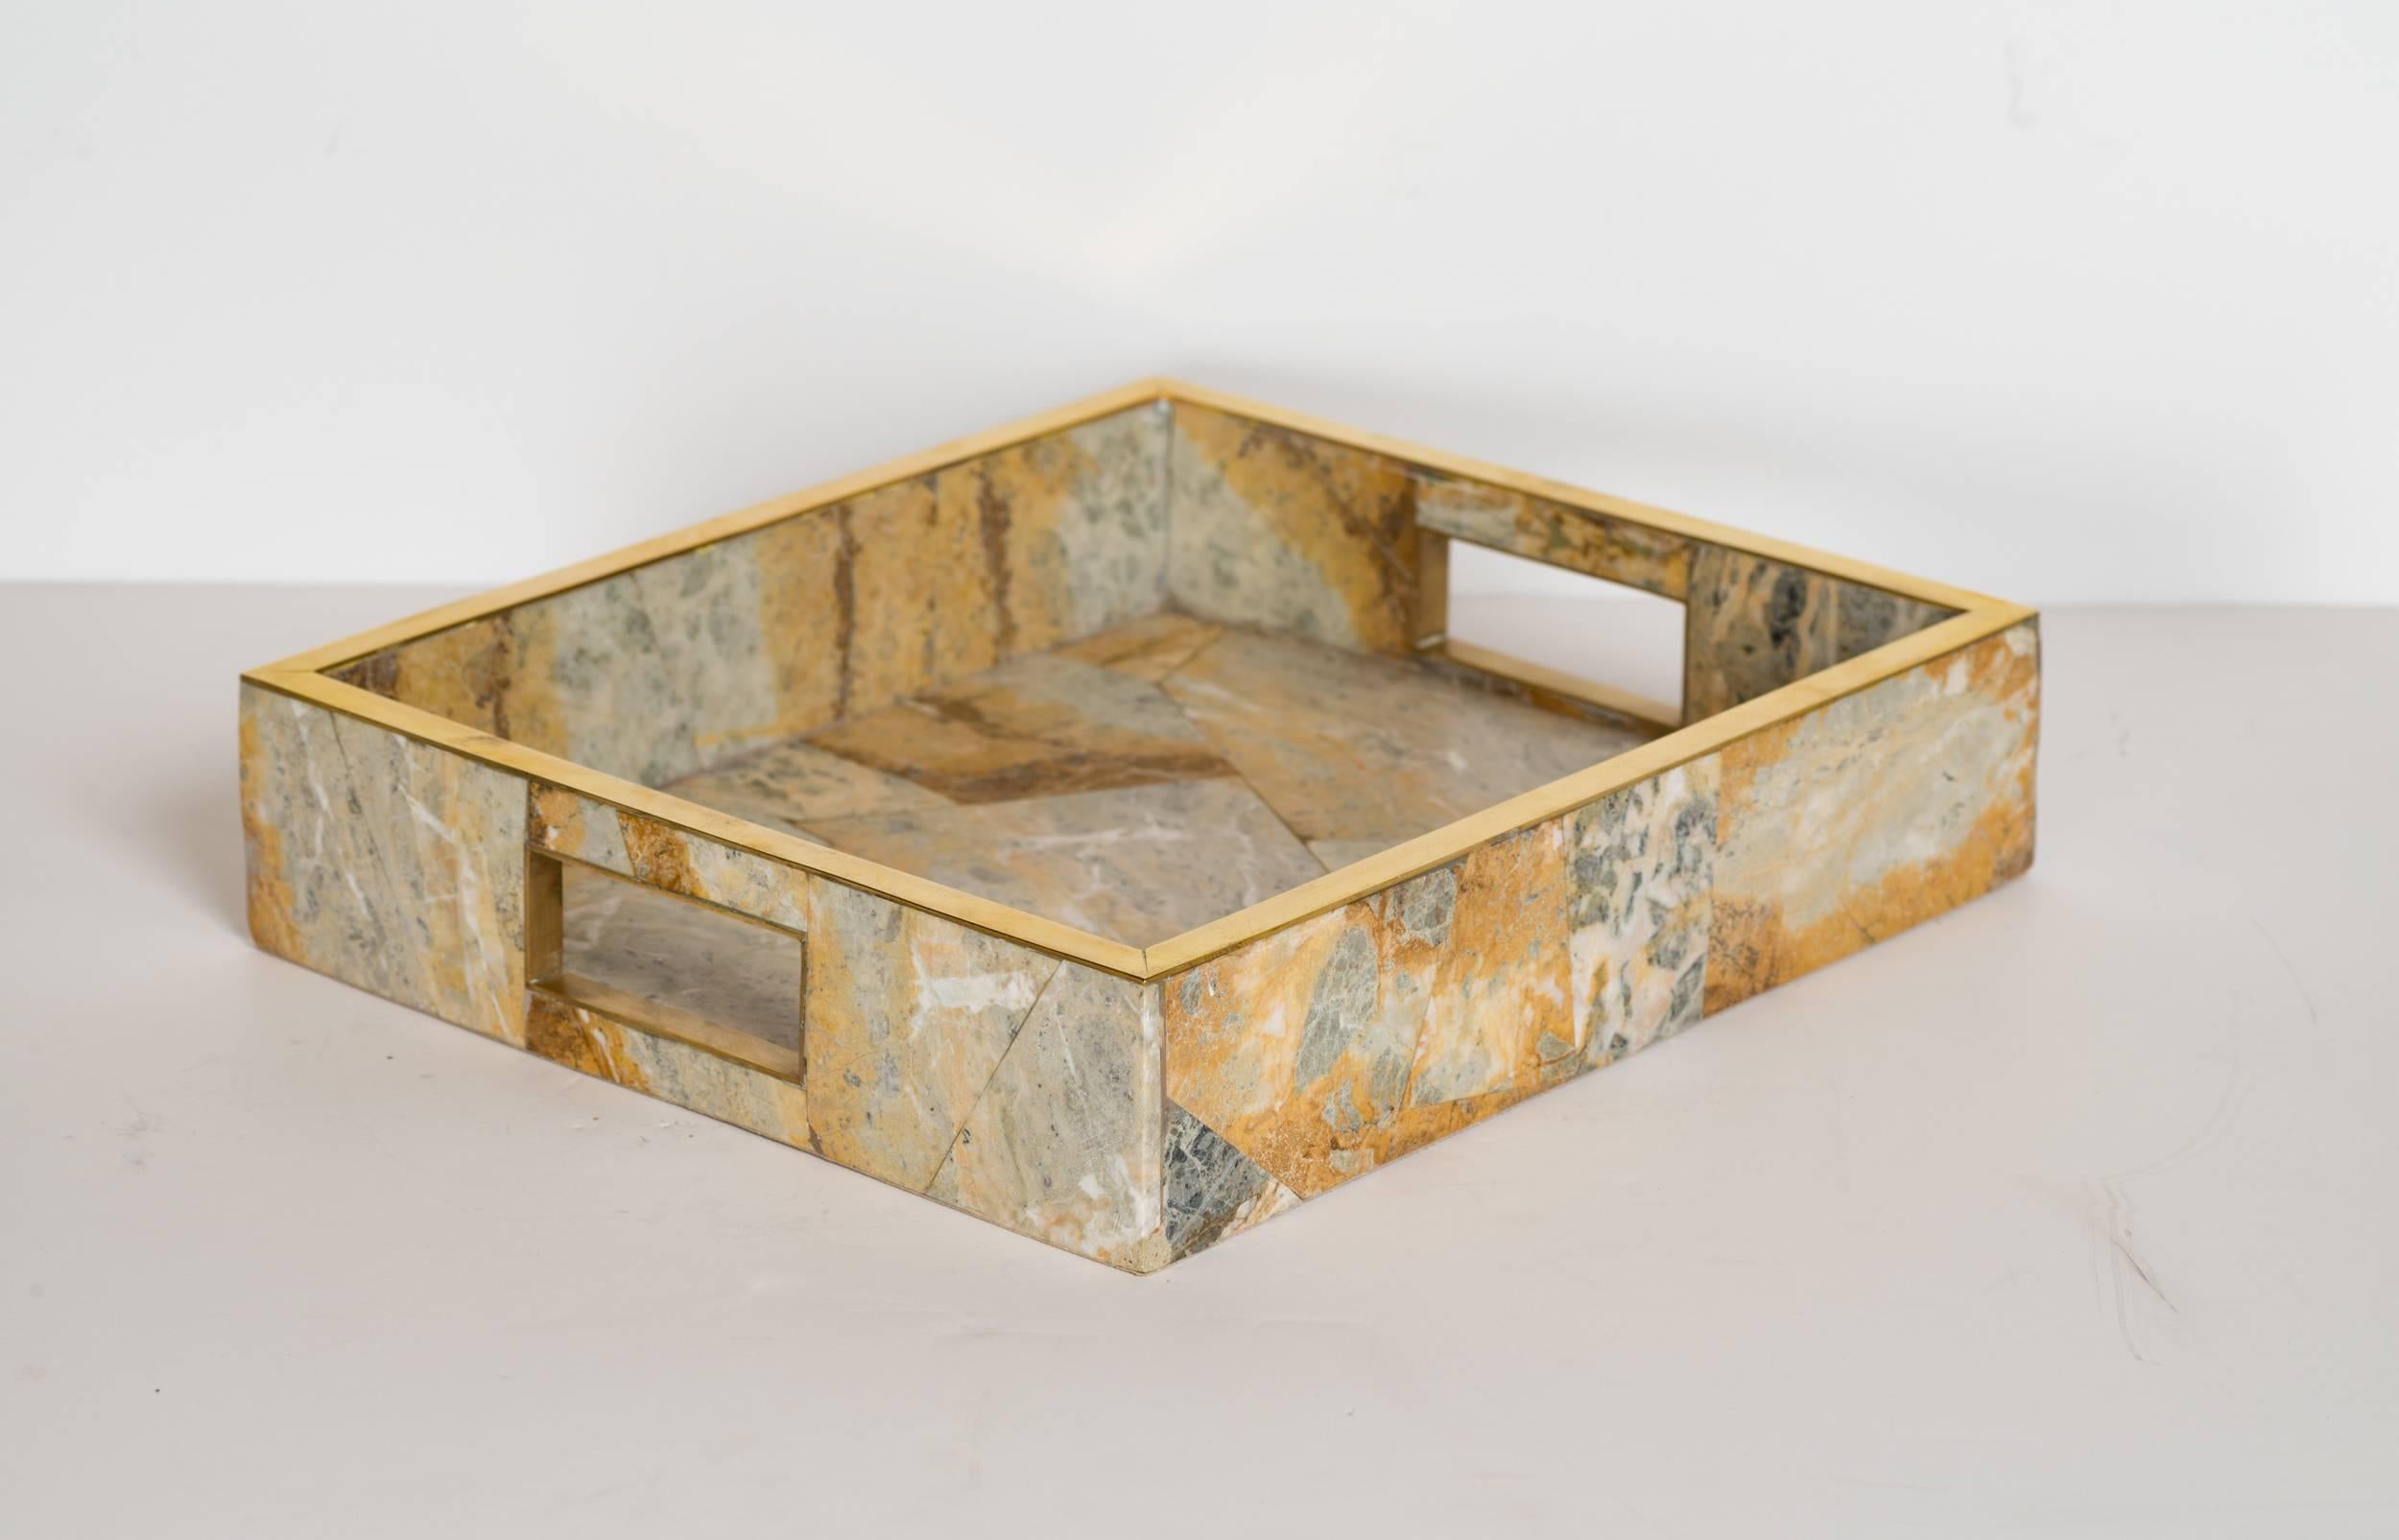 Stunning organic stone tray with mosaic patterns and geometric design. Beautiful streamline details with brass trim accents and handles. The onyx elements feature a variety of hues of brown, sand, rust, ivory, and gradient shades of green marble.